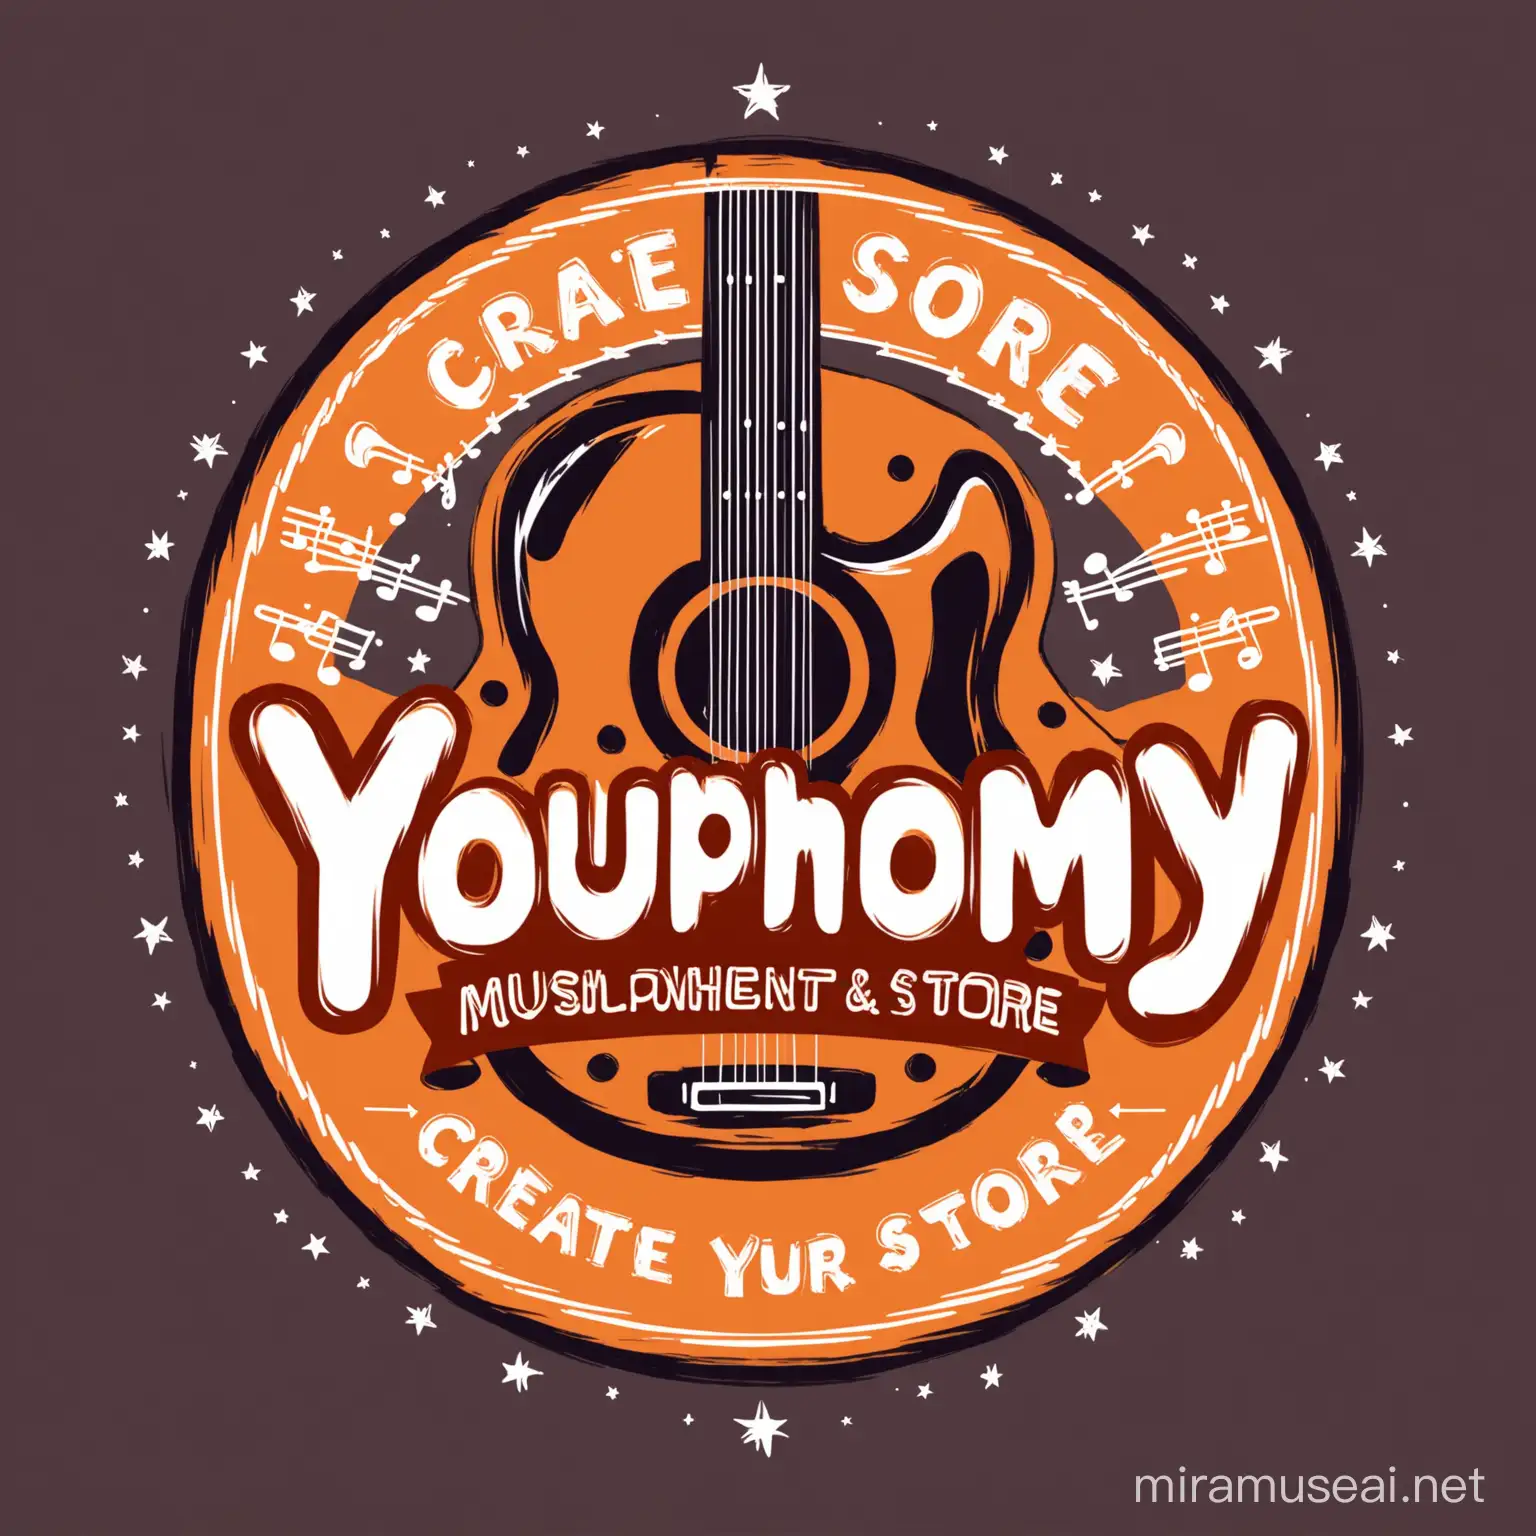 make a logo for a music store (musical instrument store or guitar store) called "YOUPHONY" with a slogan "Create Euphony Your Own Way"